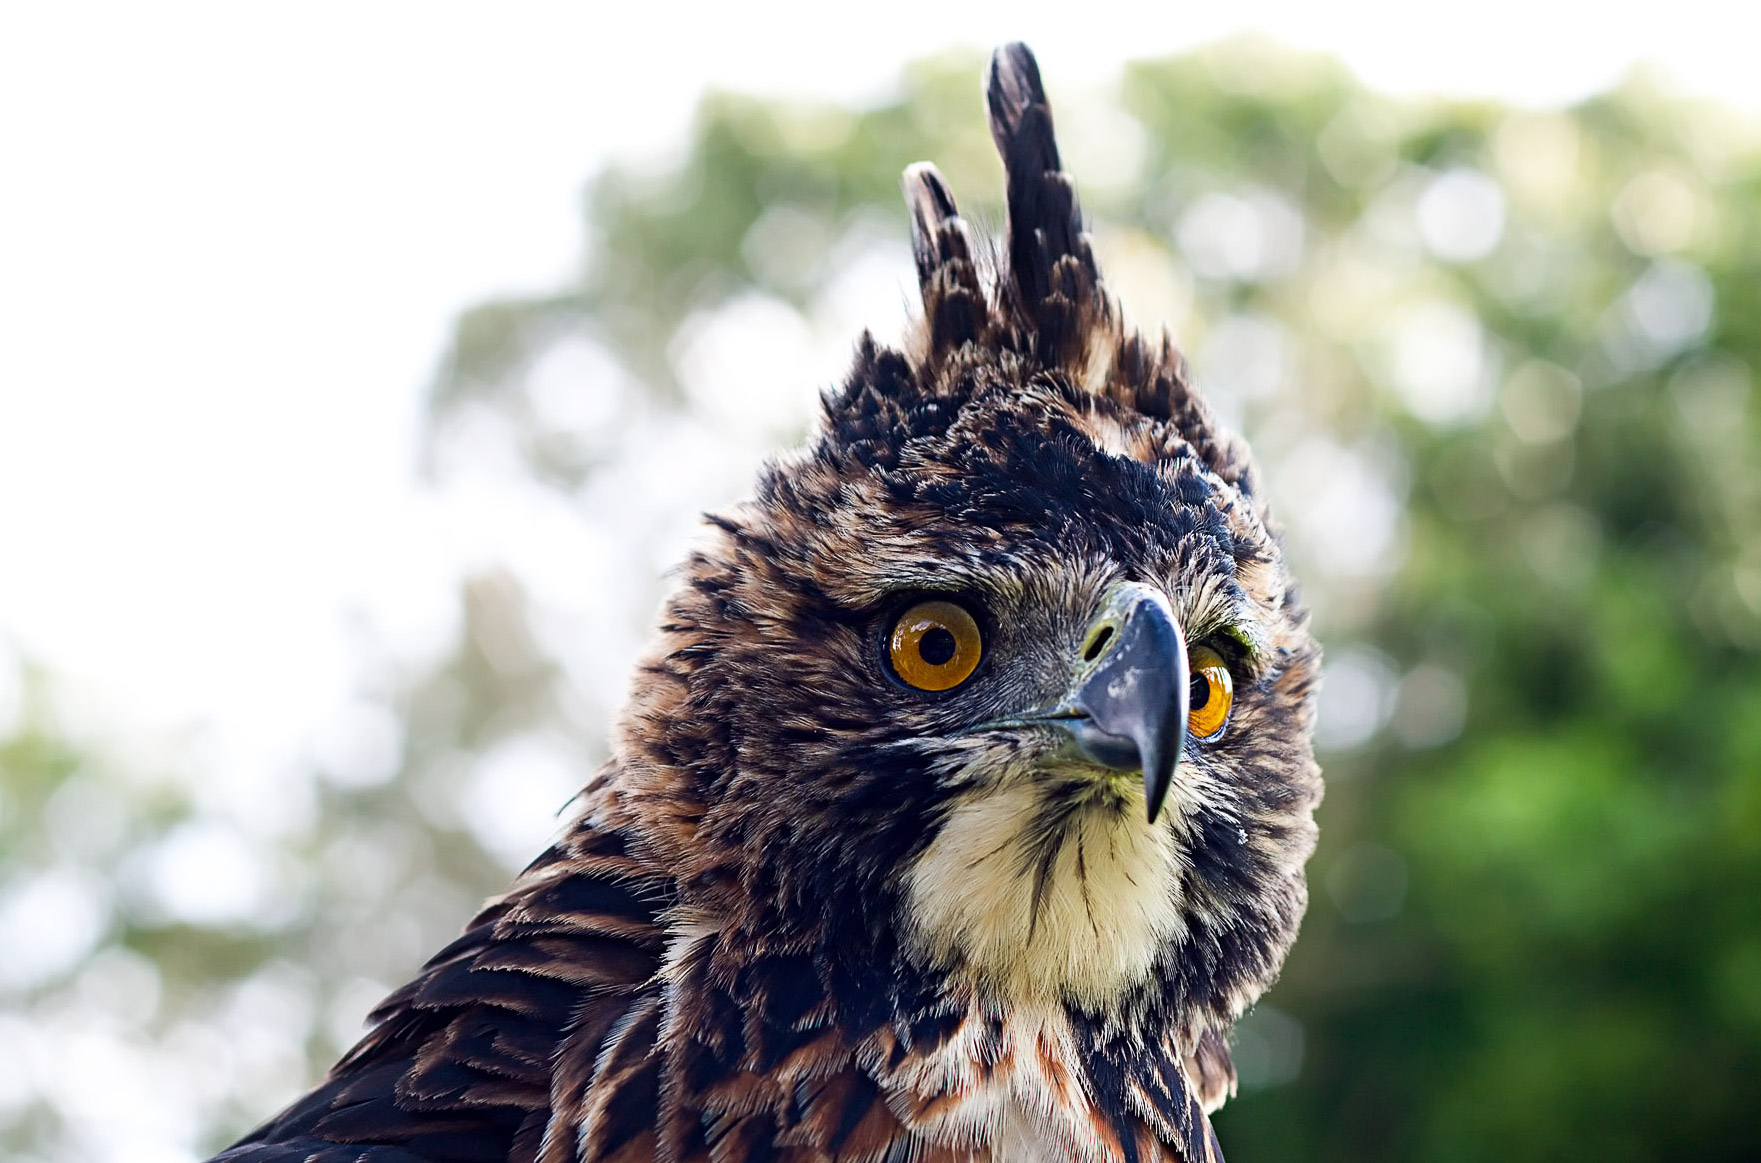 Ornate Hawk-Eagle. Photo credit: Santiago Restrepo Calle (Flickr / CC BY-NC-ND 2.0)